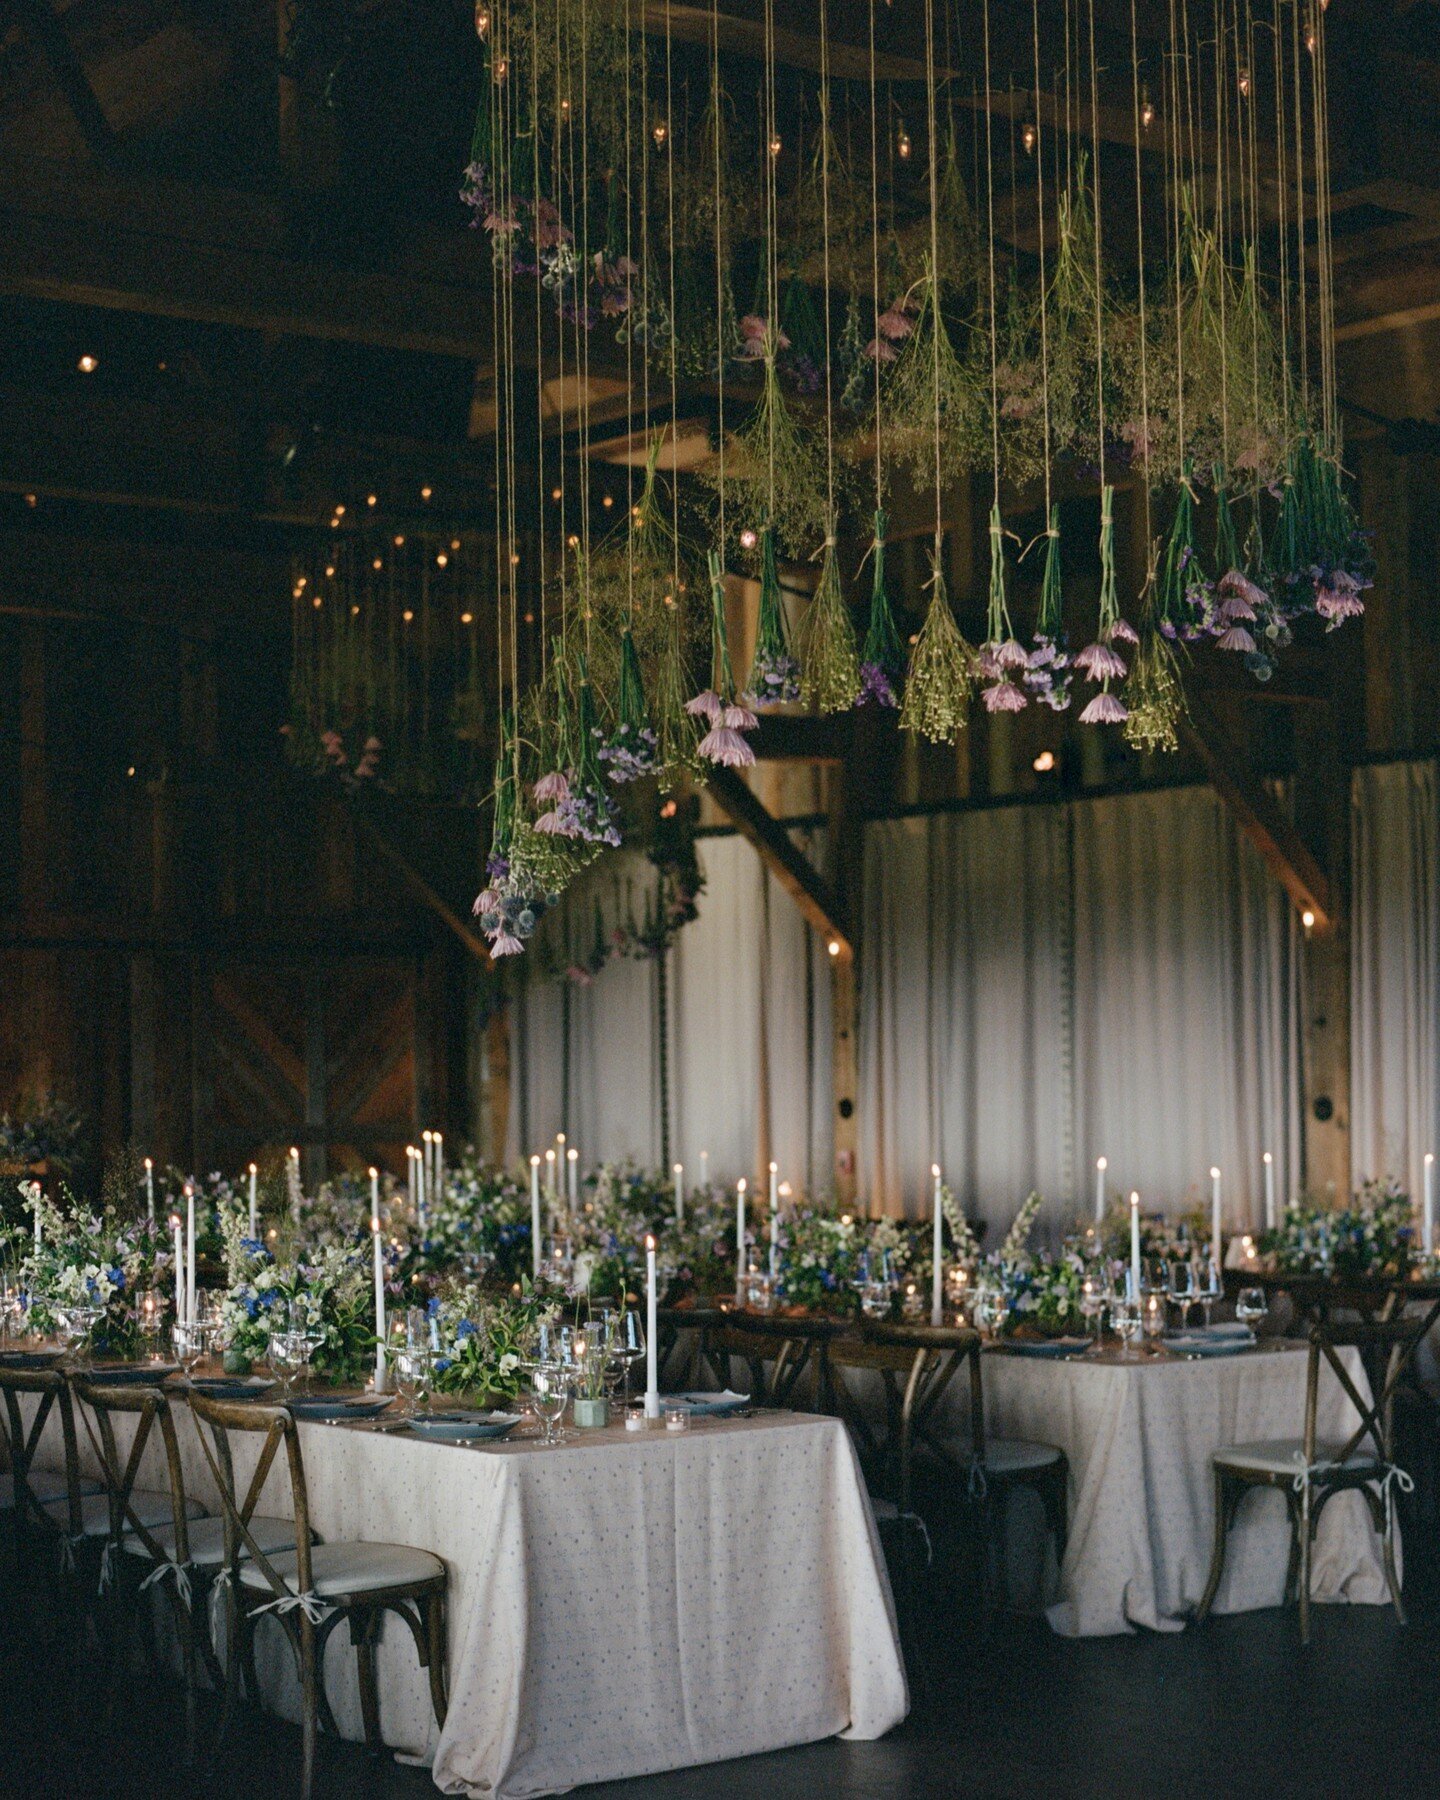 The spacious great room @brushcreekranch was transformed into a garden of earthy wildflowers. Delicate, floral creations were suspended from the many (gigantic) chandeliers.... swaying, spinning, and casting beautiful, unexpected shadows on the table